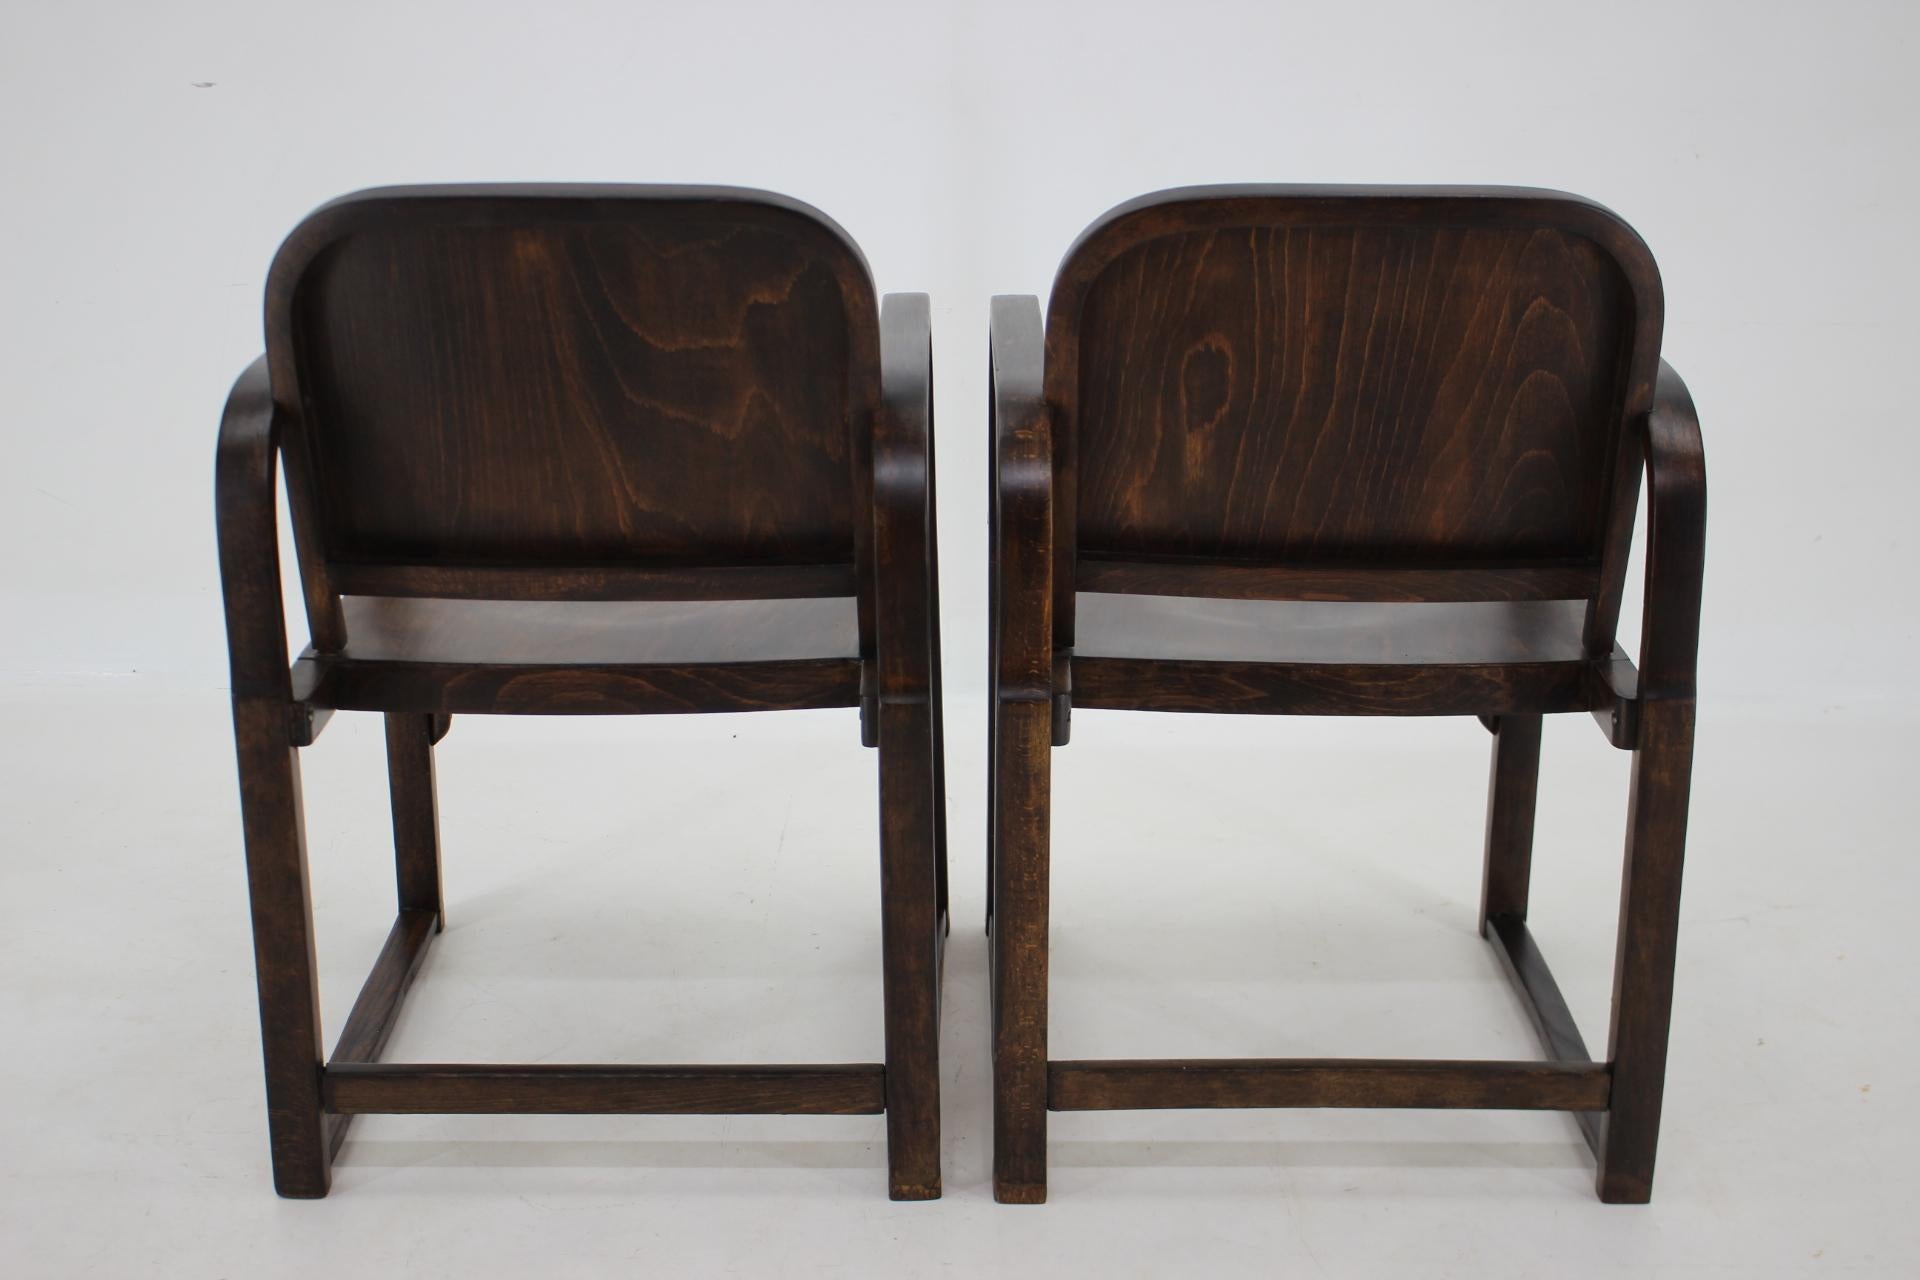 1930s Pair of Thonet Bentwood Armchairs A745 by Tatra, Czechoslovakia For Sale 1